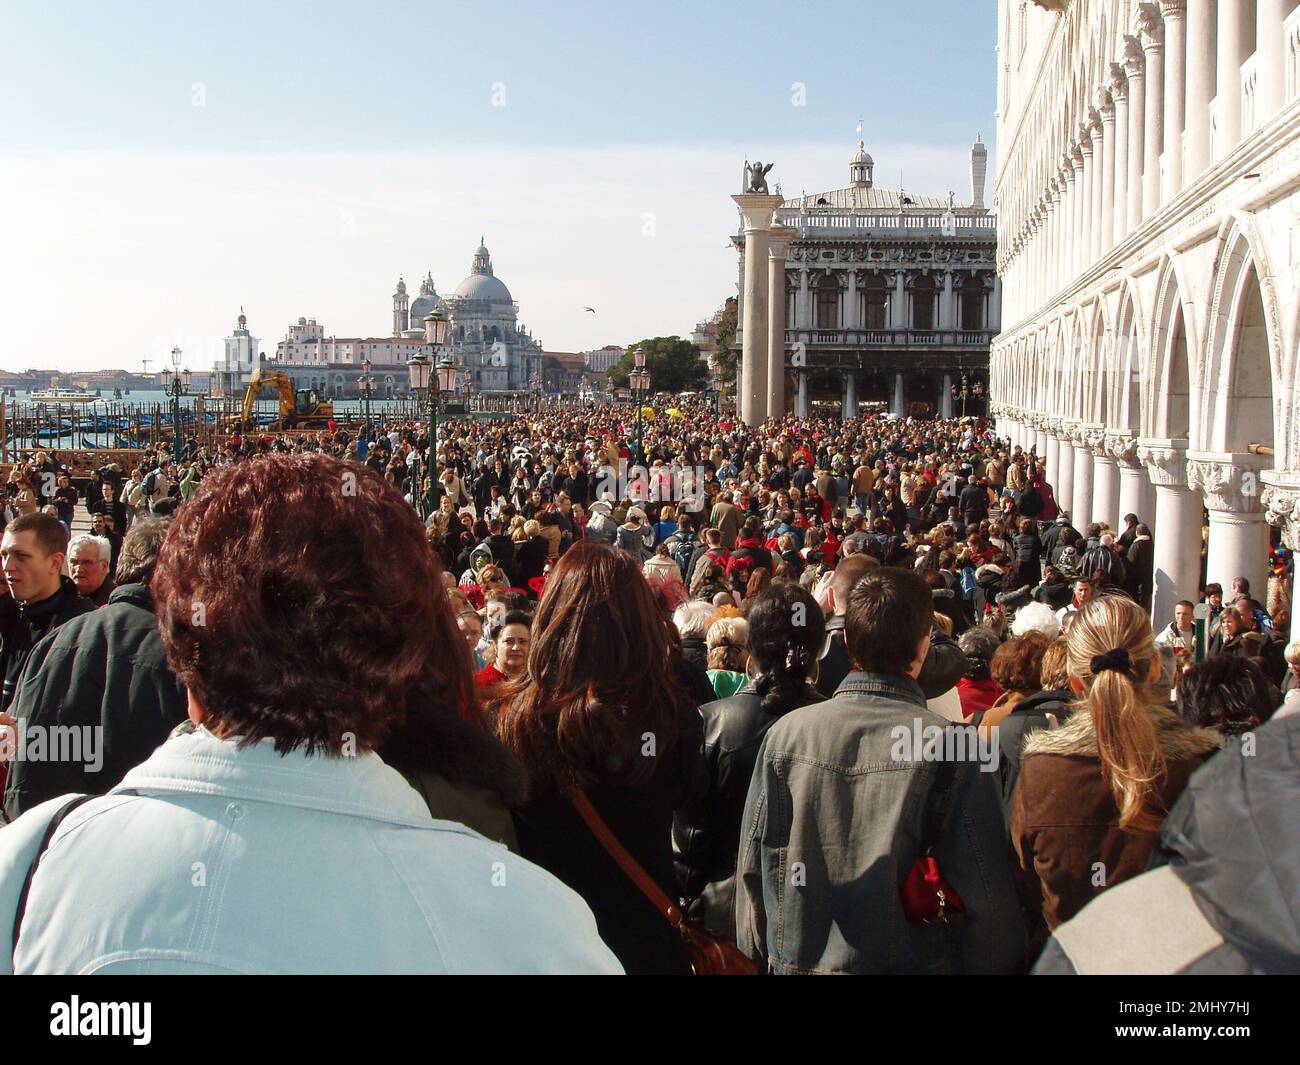 Multitude of people present for a joyful and fun event Stock Photo